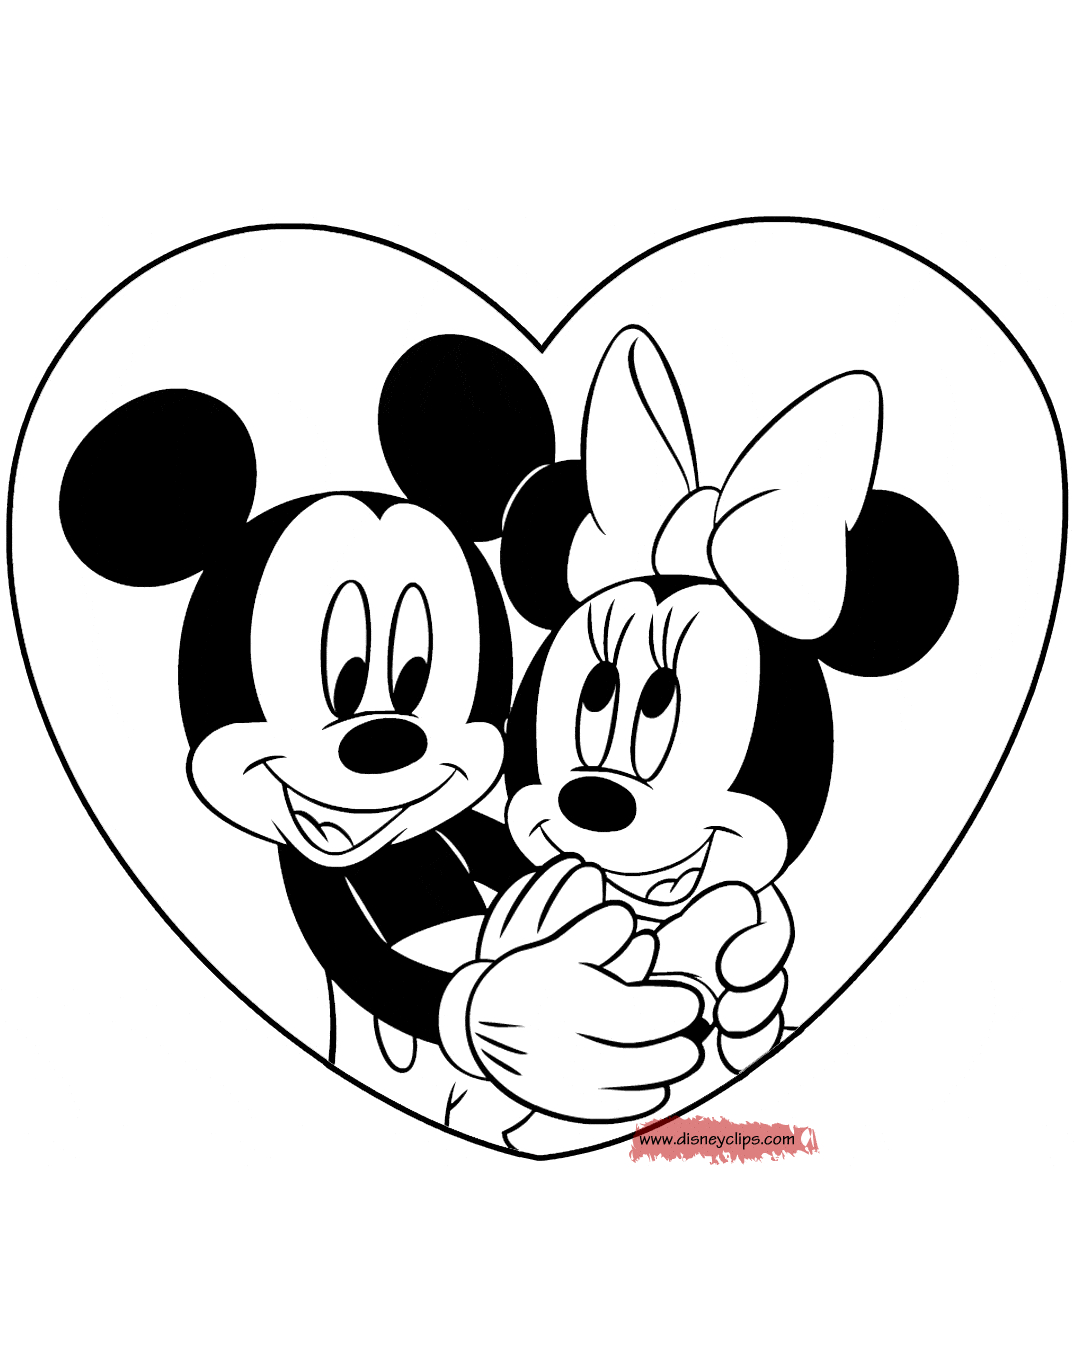 Mickey And Minnie Coloring Pages To Print Coloring Ideas Mickey And Minnie Coloring Page Cosmo Scope Com